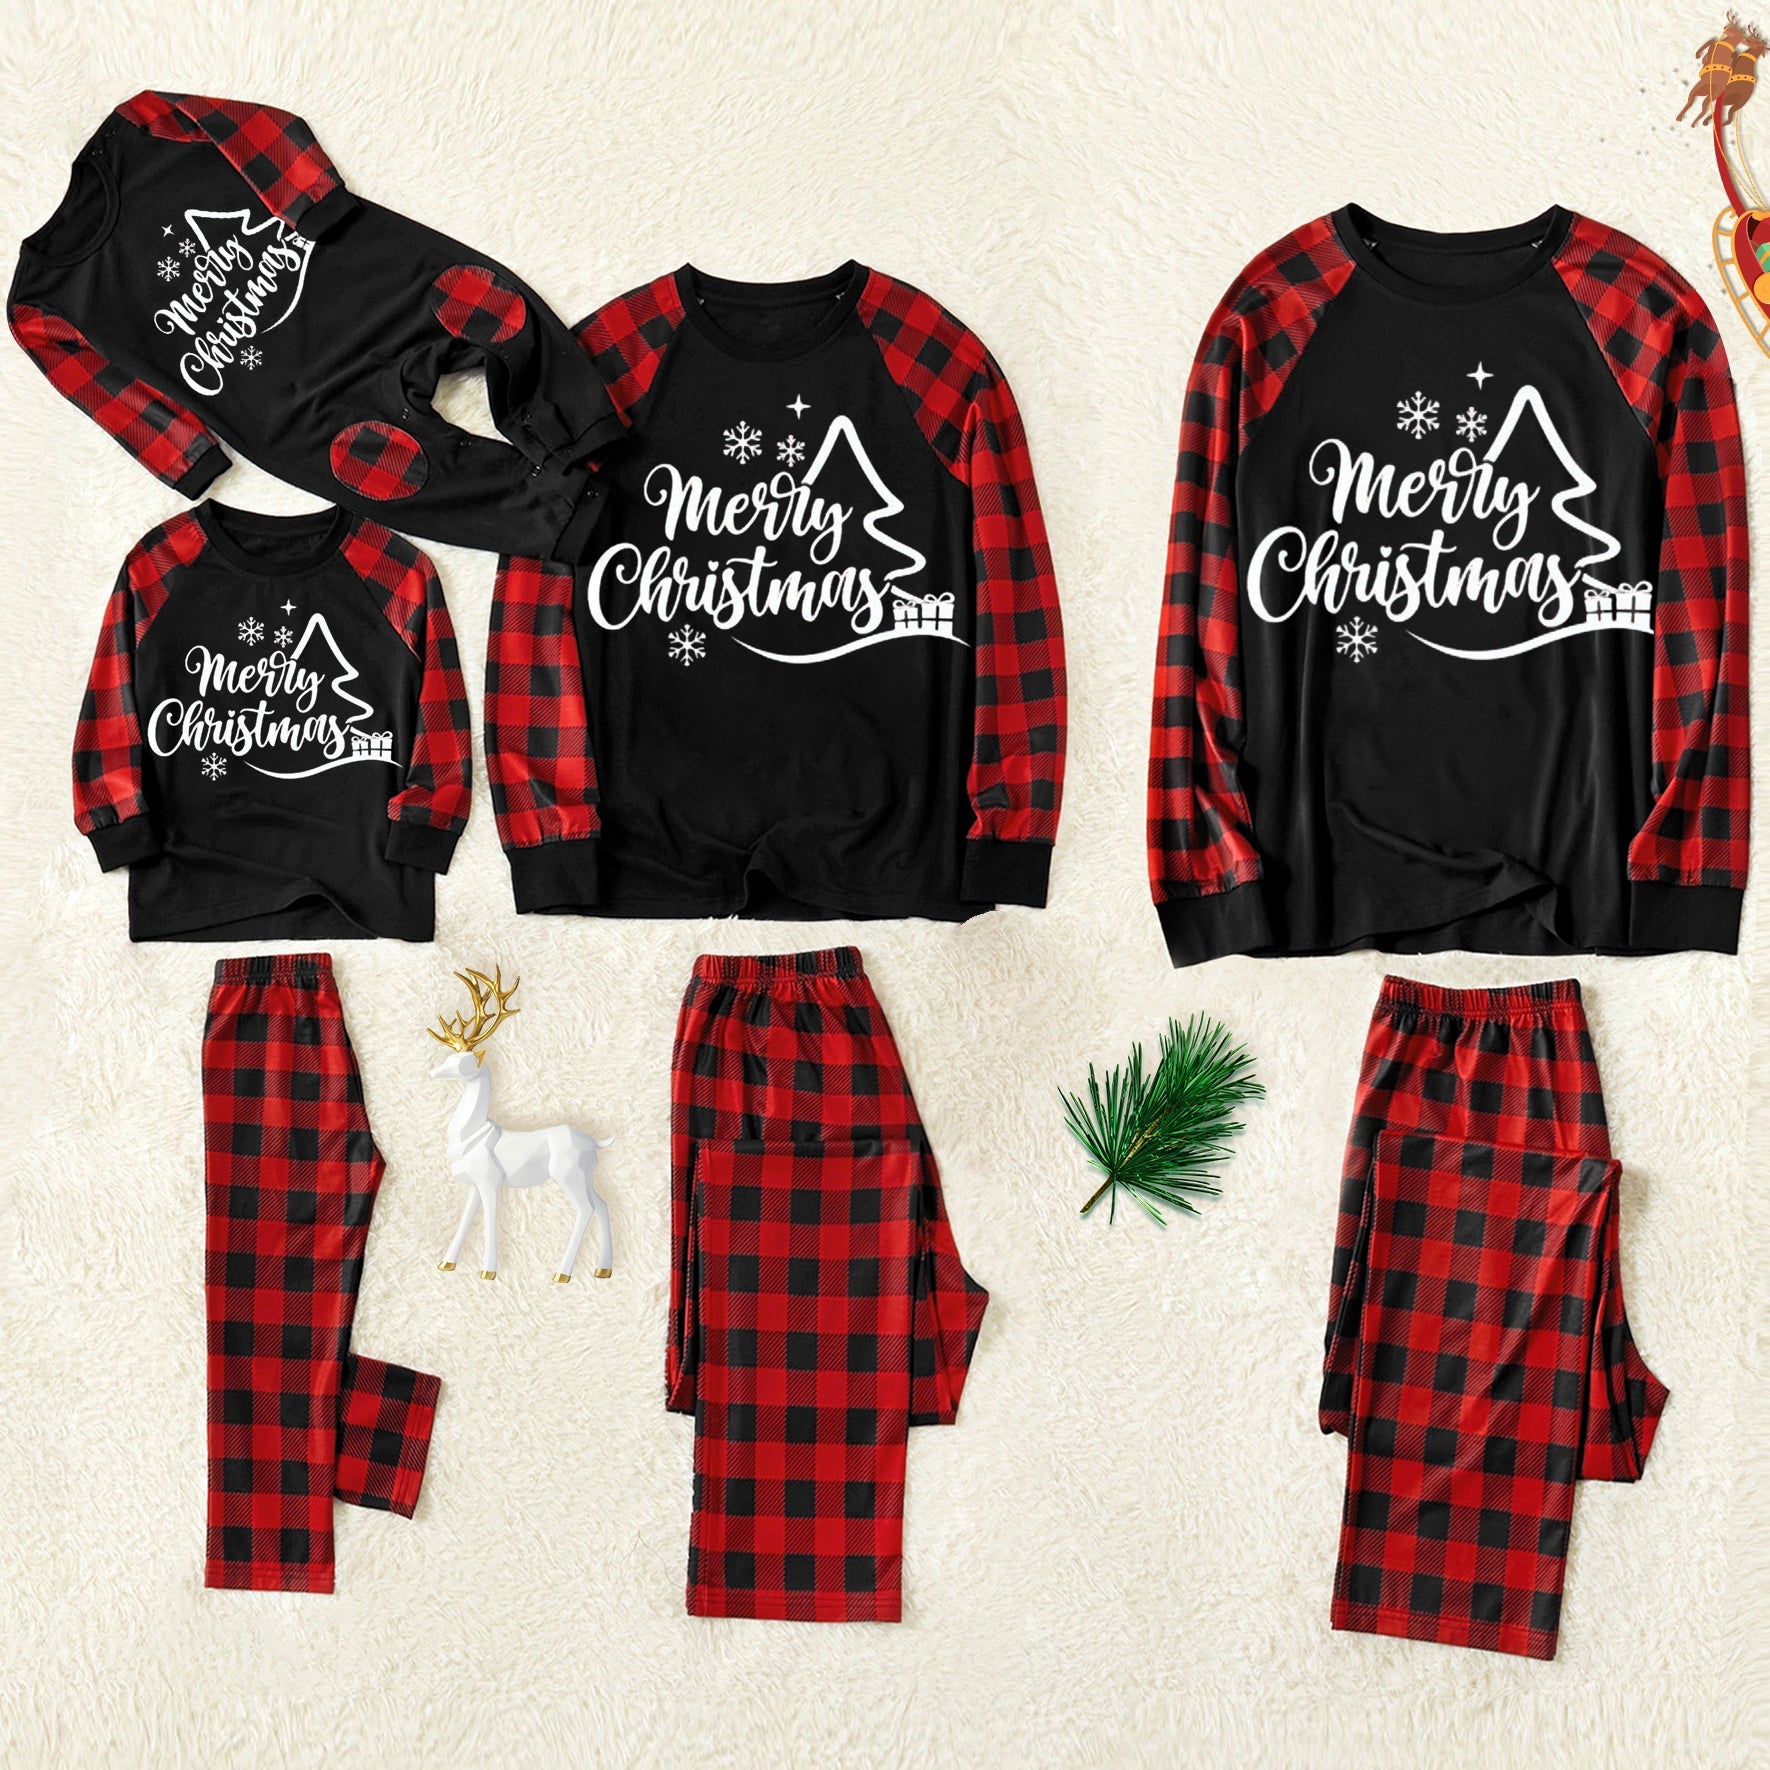 Snowflake & Christmas Gift Patterned ”Merry Christmas“ Letter Print Patterned Contrast Black top and Black & Red Plaid Pants Family Matching Pajamas Set With Dog Bandana